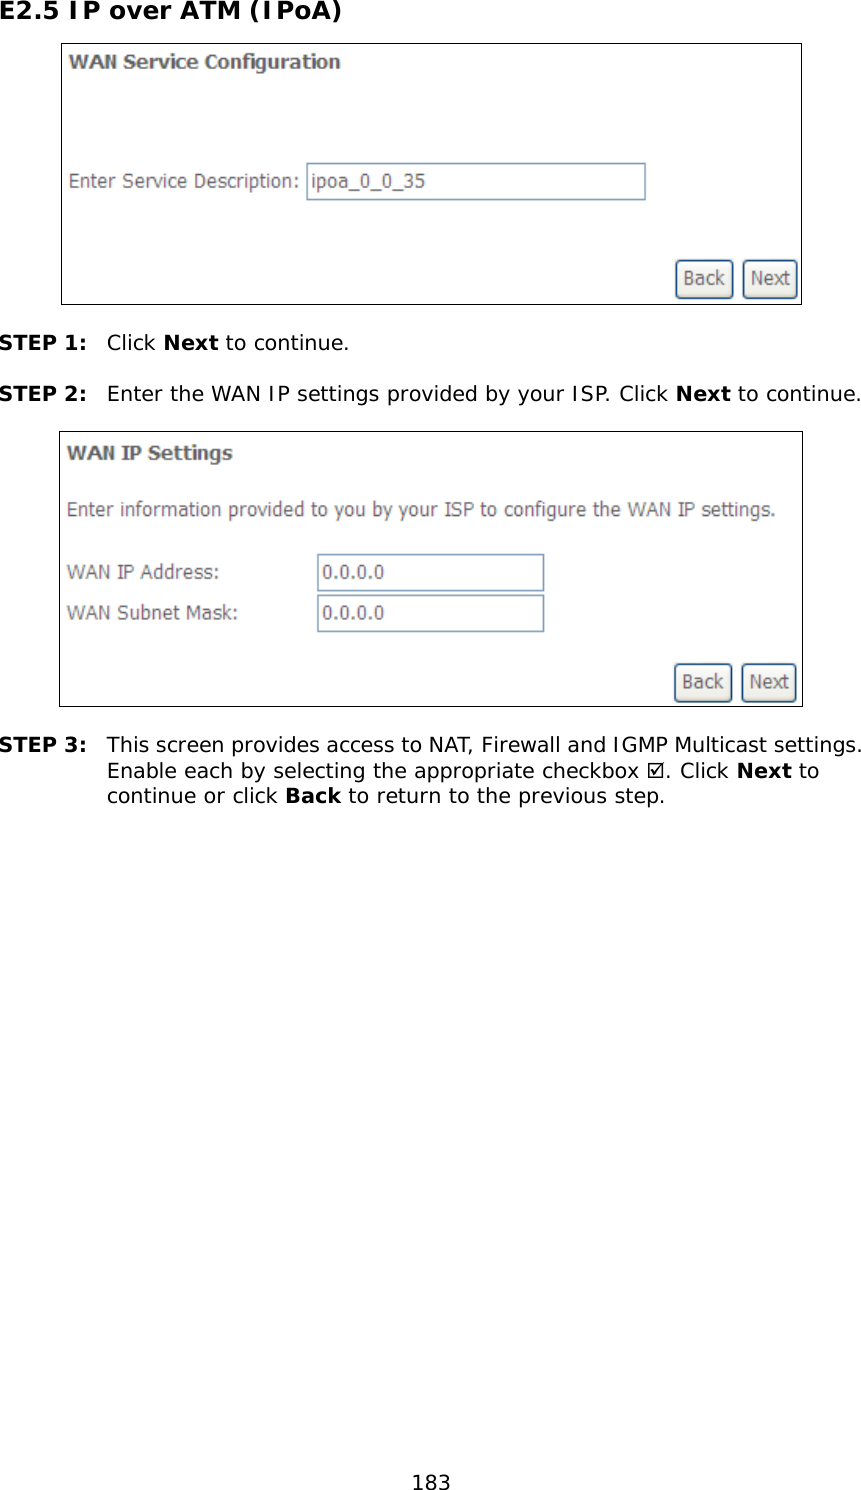  183 E2.5 IP over ATM (IPoA)   STEP 1:  Click Next to continue.  STEP 2:  Enter the WAN IP settings provided by your ISP. Click Next to continue.    STEP 3:  This screen provides access to NAT, Firewall and IGMP Multicast settings. Enable each by selecting the appropriate checkbox . Click Next to continue or click Back to return to the previous step.  